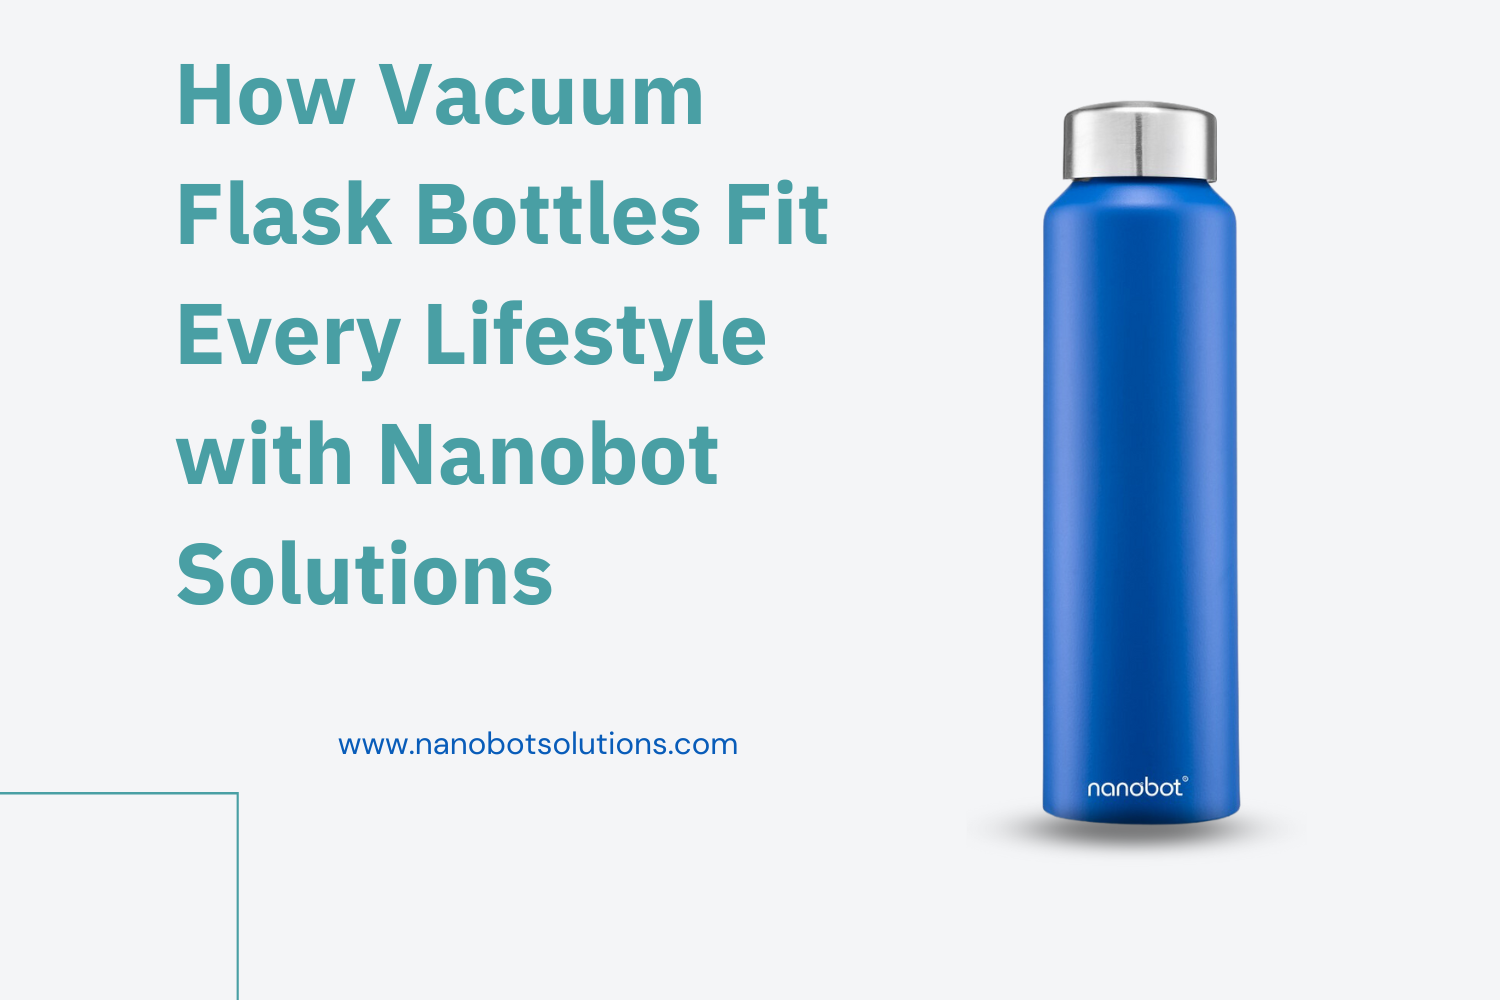 How Vacuum Flask Bottles Fit Every Lifestyle with Nanobot Solutions 1 | Nanobot